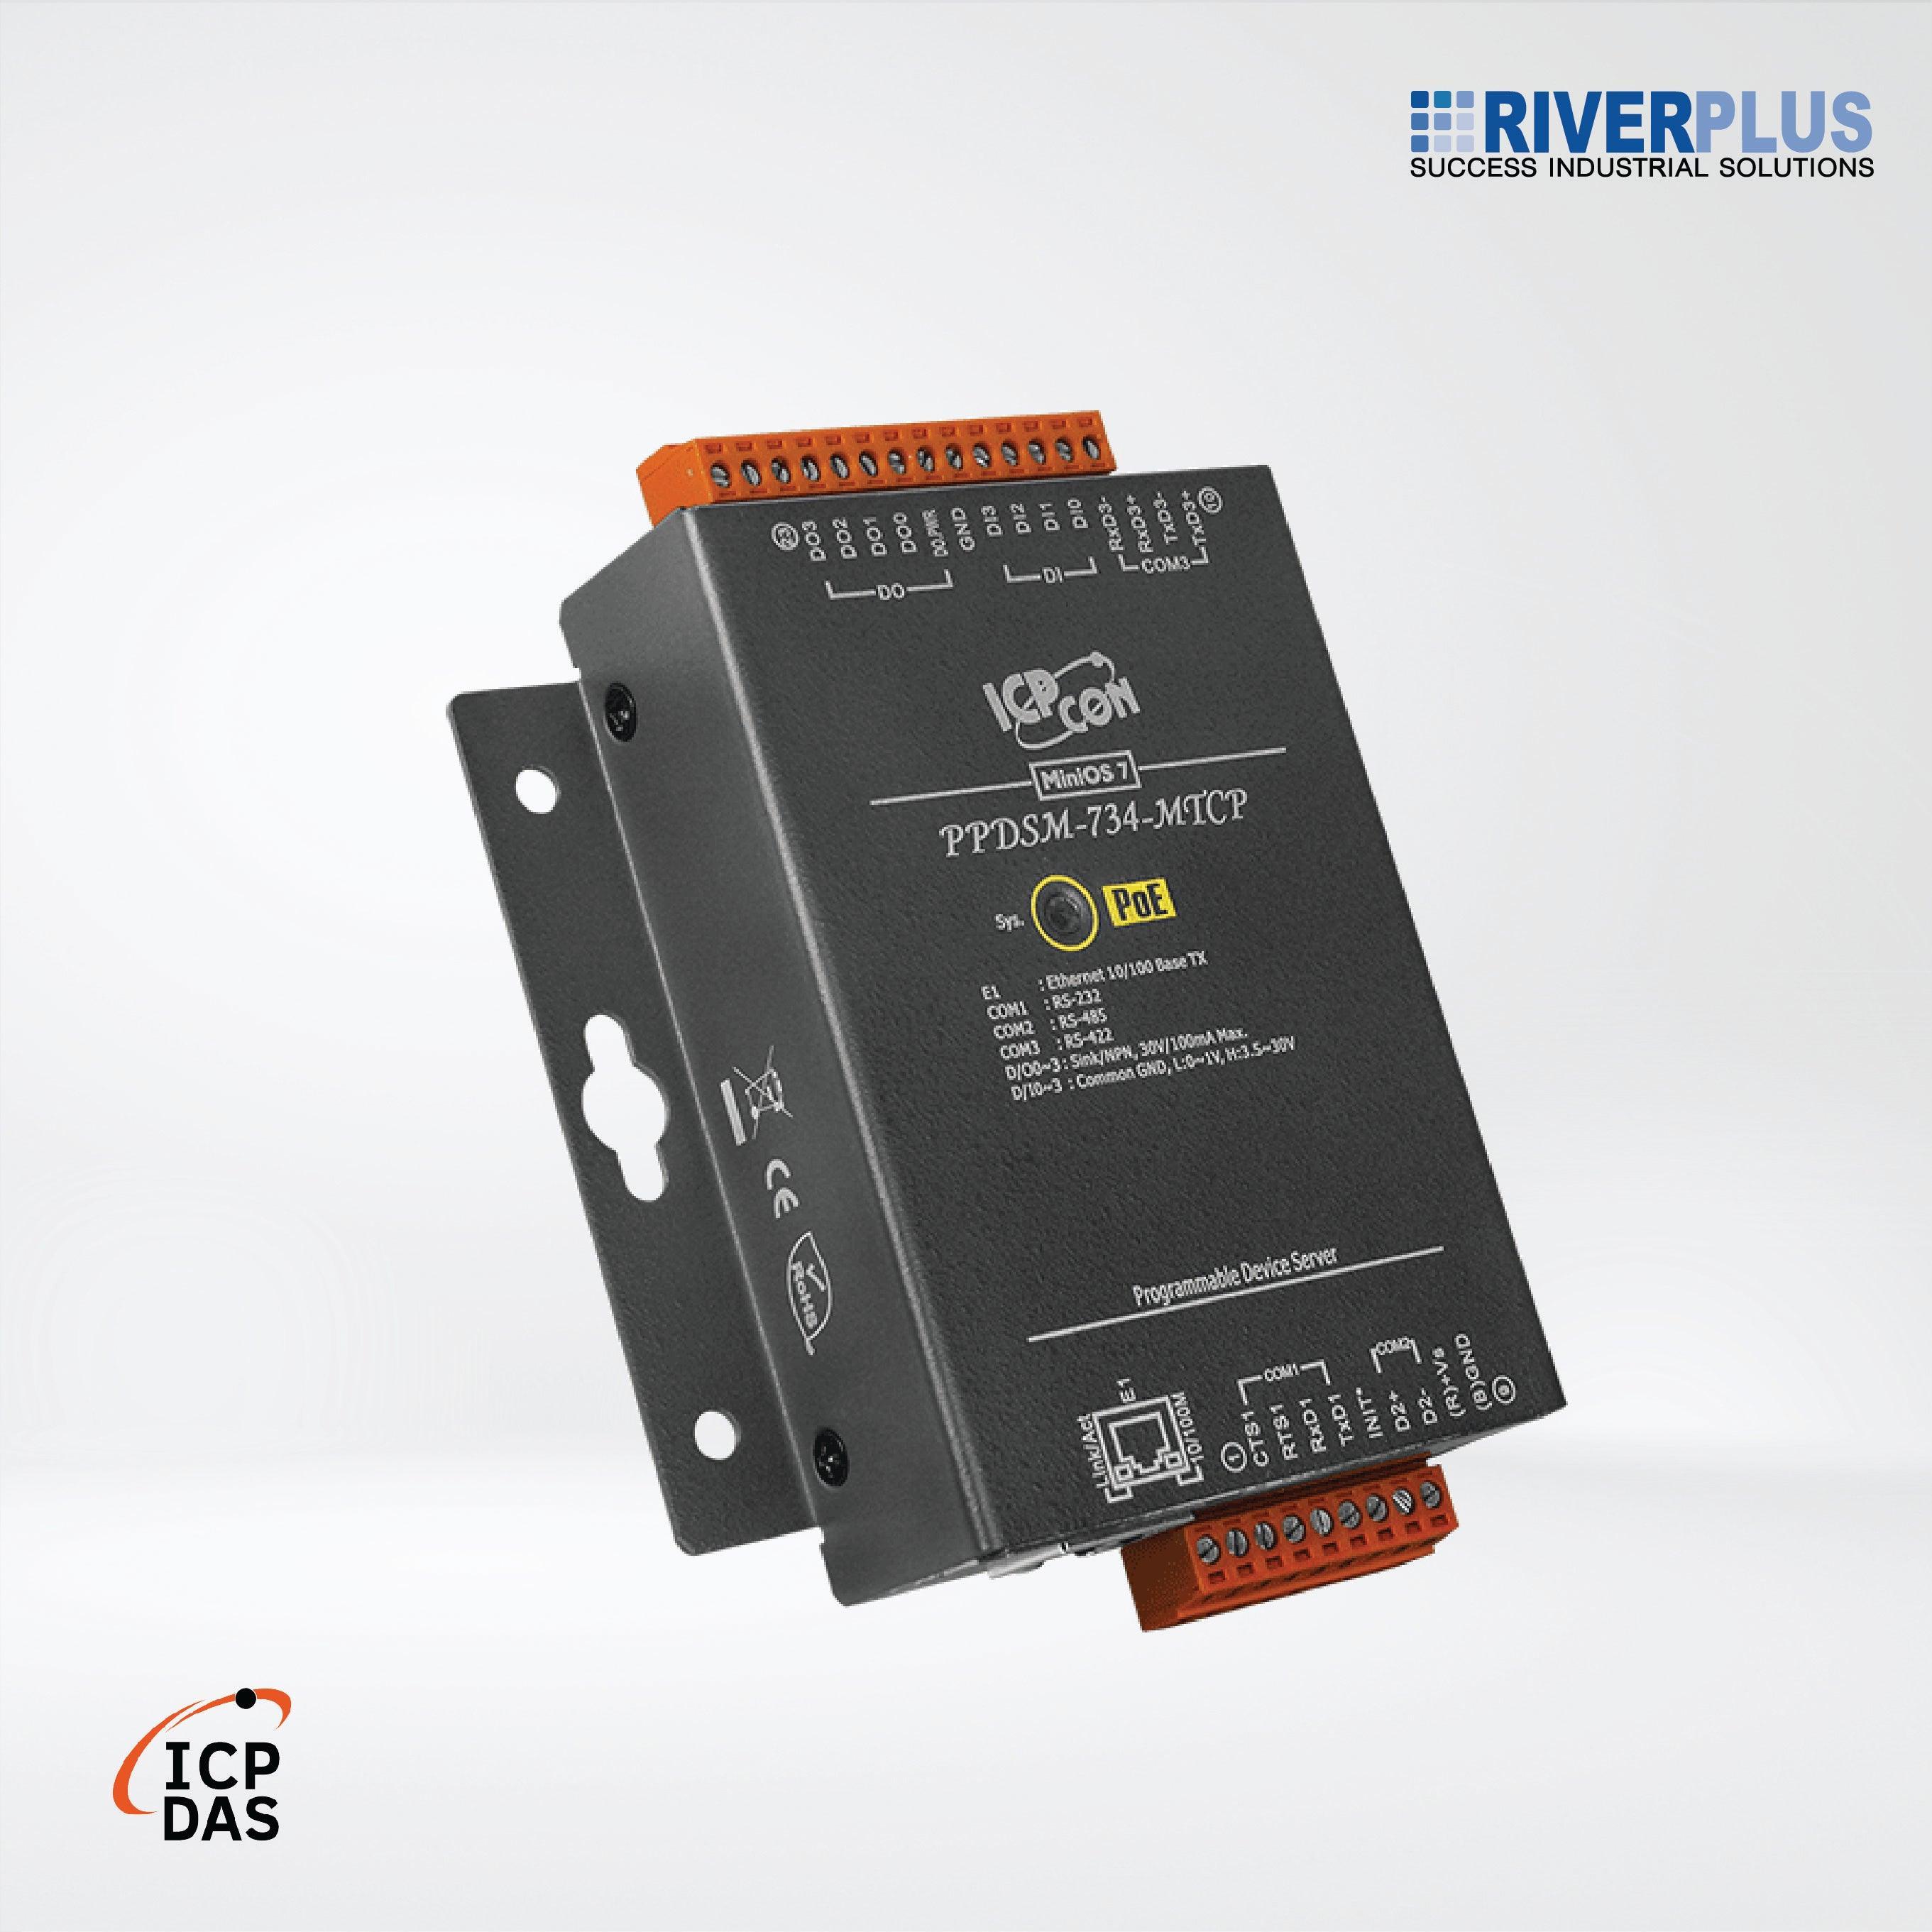 PPDSM-734-MTCP Programmable (1x RS-232, 1x RS-485 and 1x RS-422/485) Serial-to-Ethernet Device Server - Riverplus